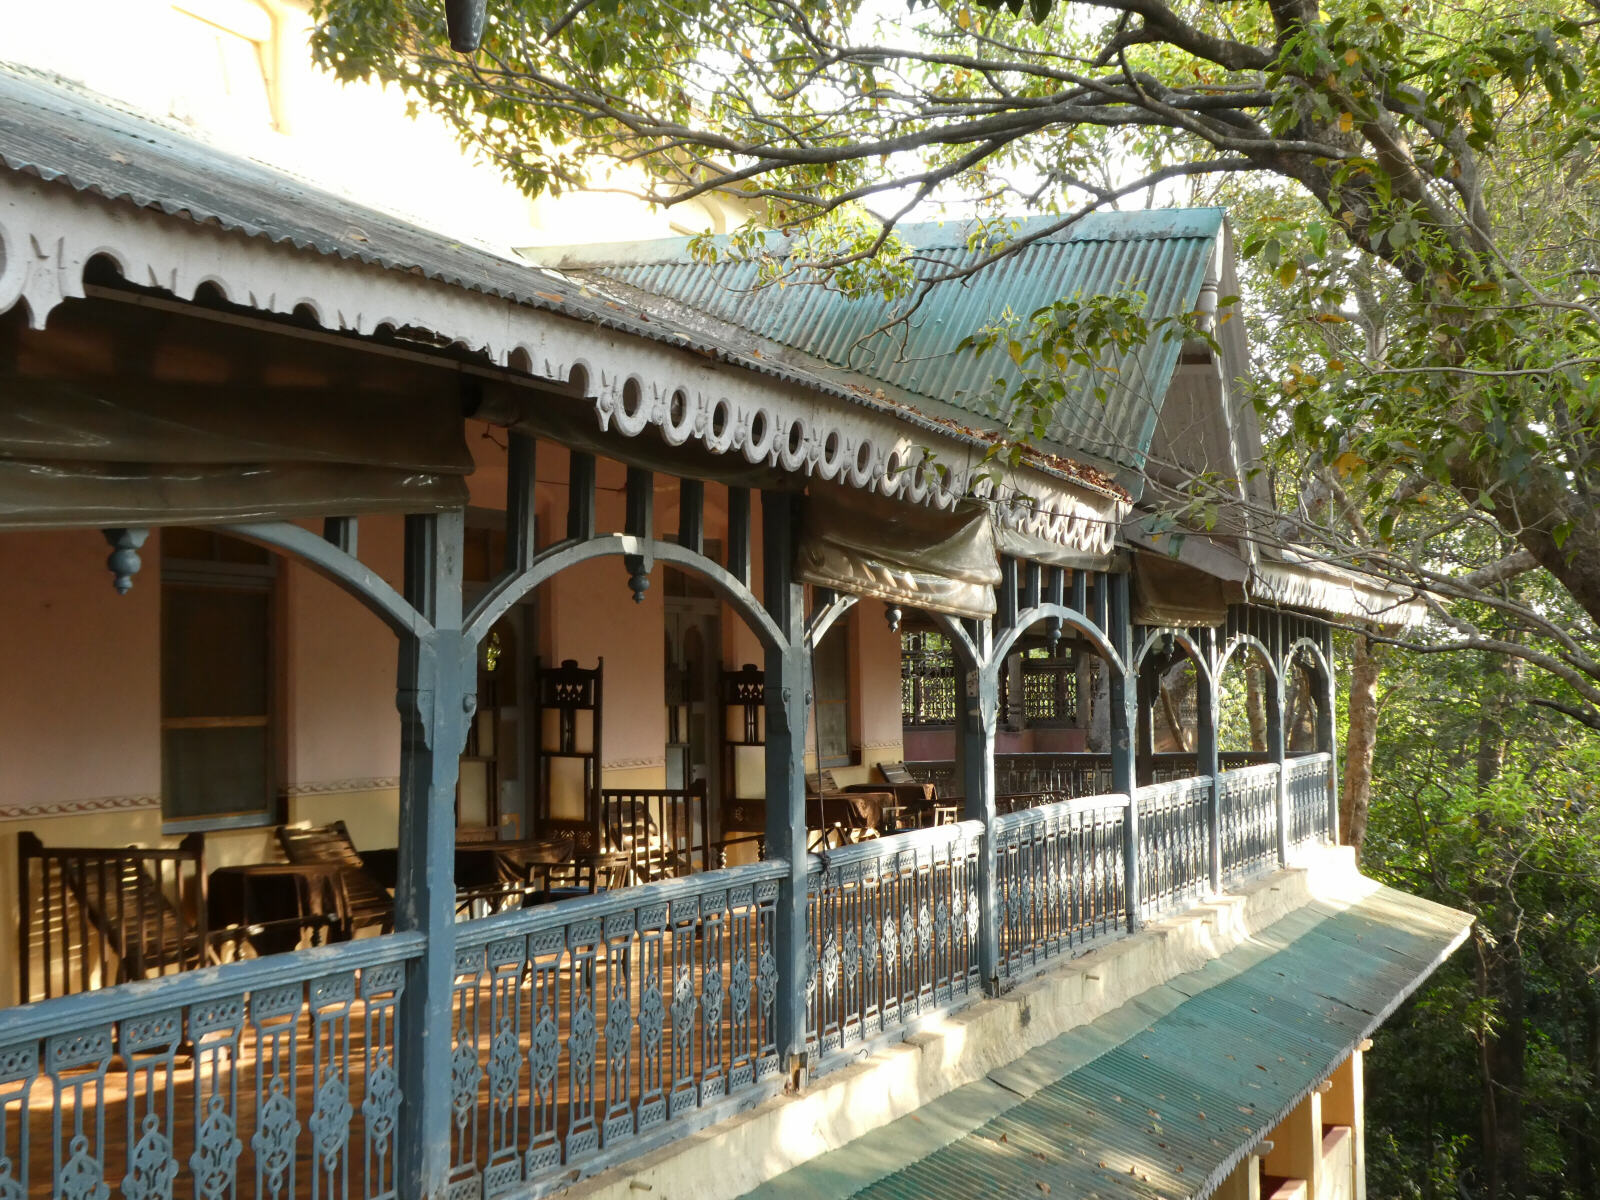 Dune Barr hotel, the Verandah in the forest, in Matheran, India